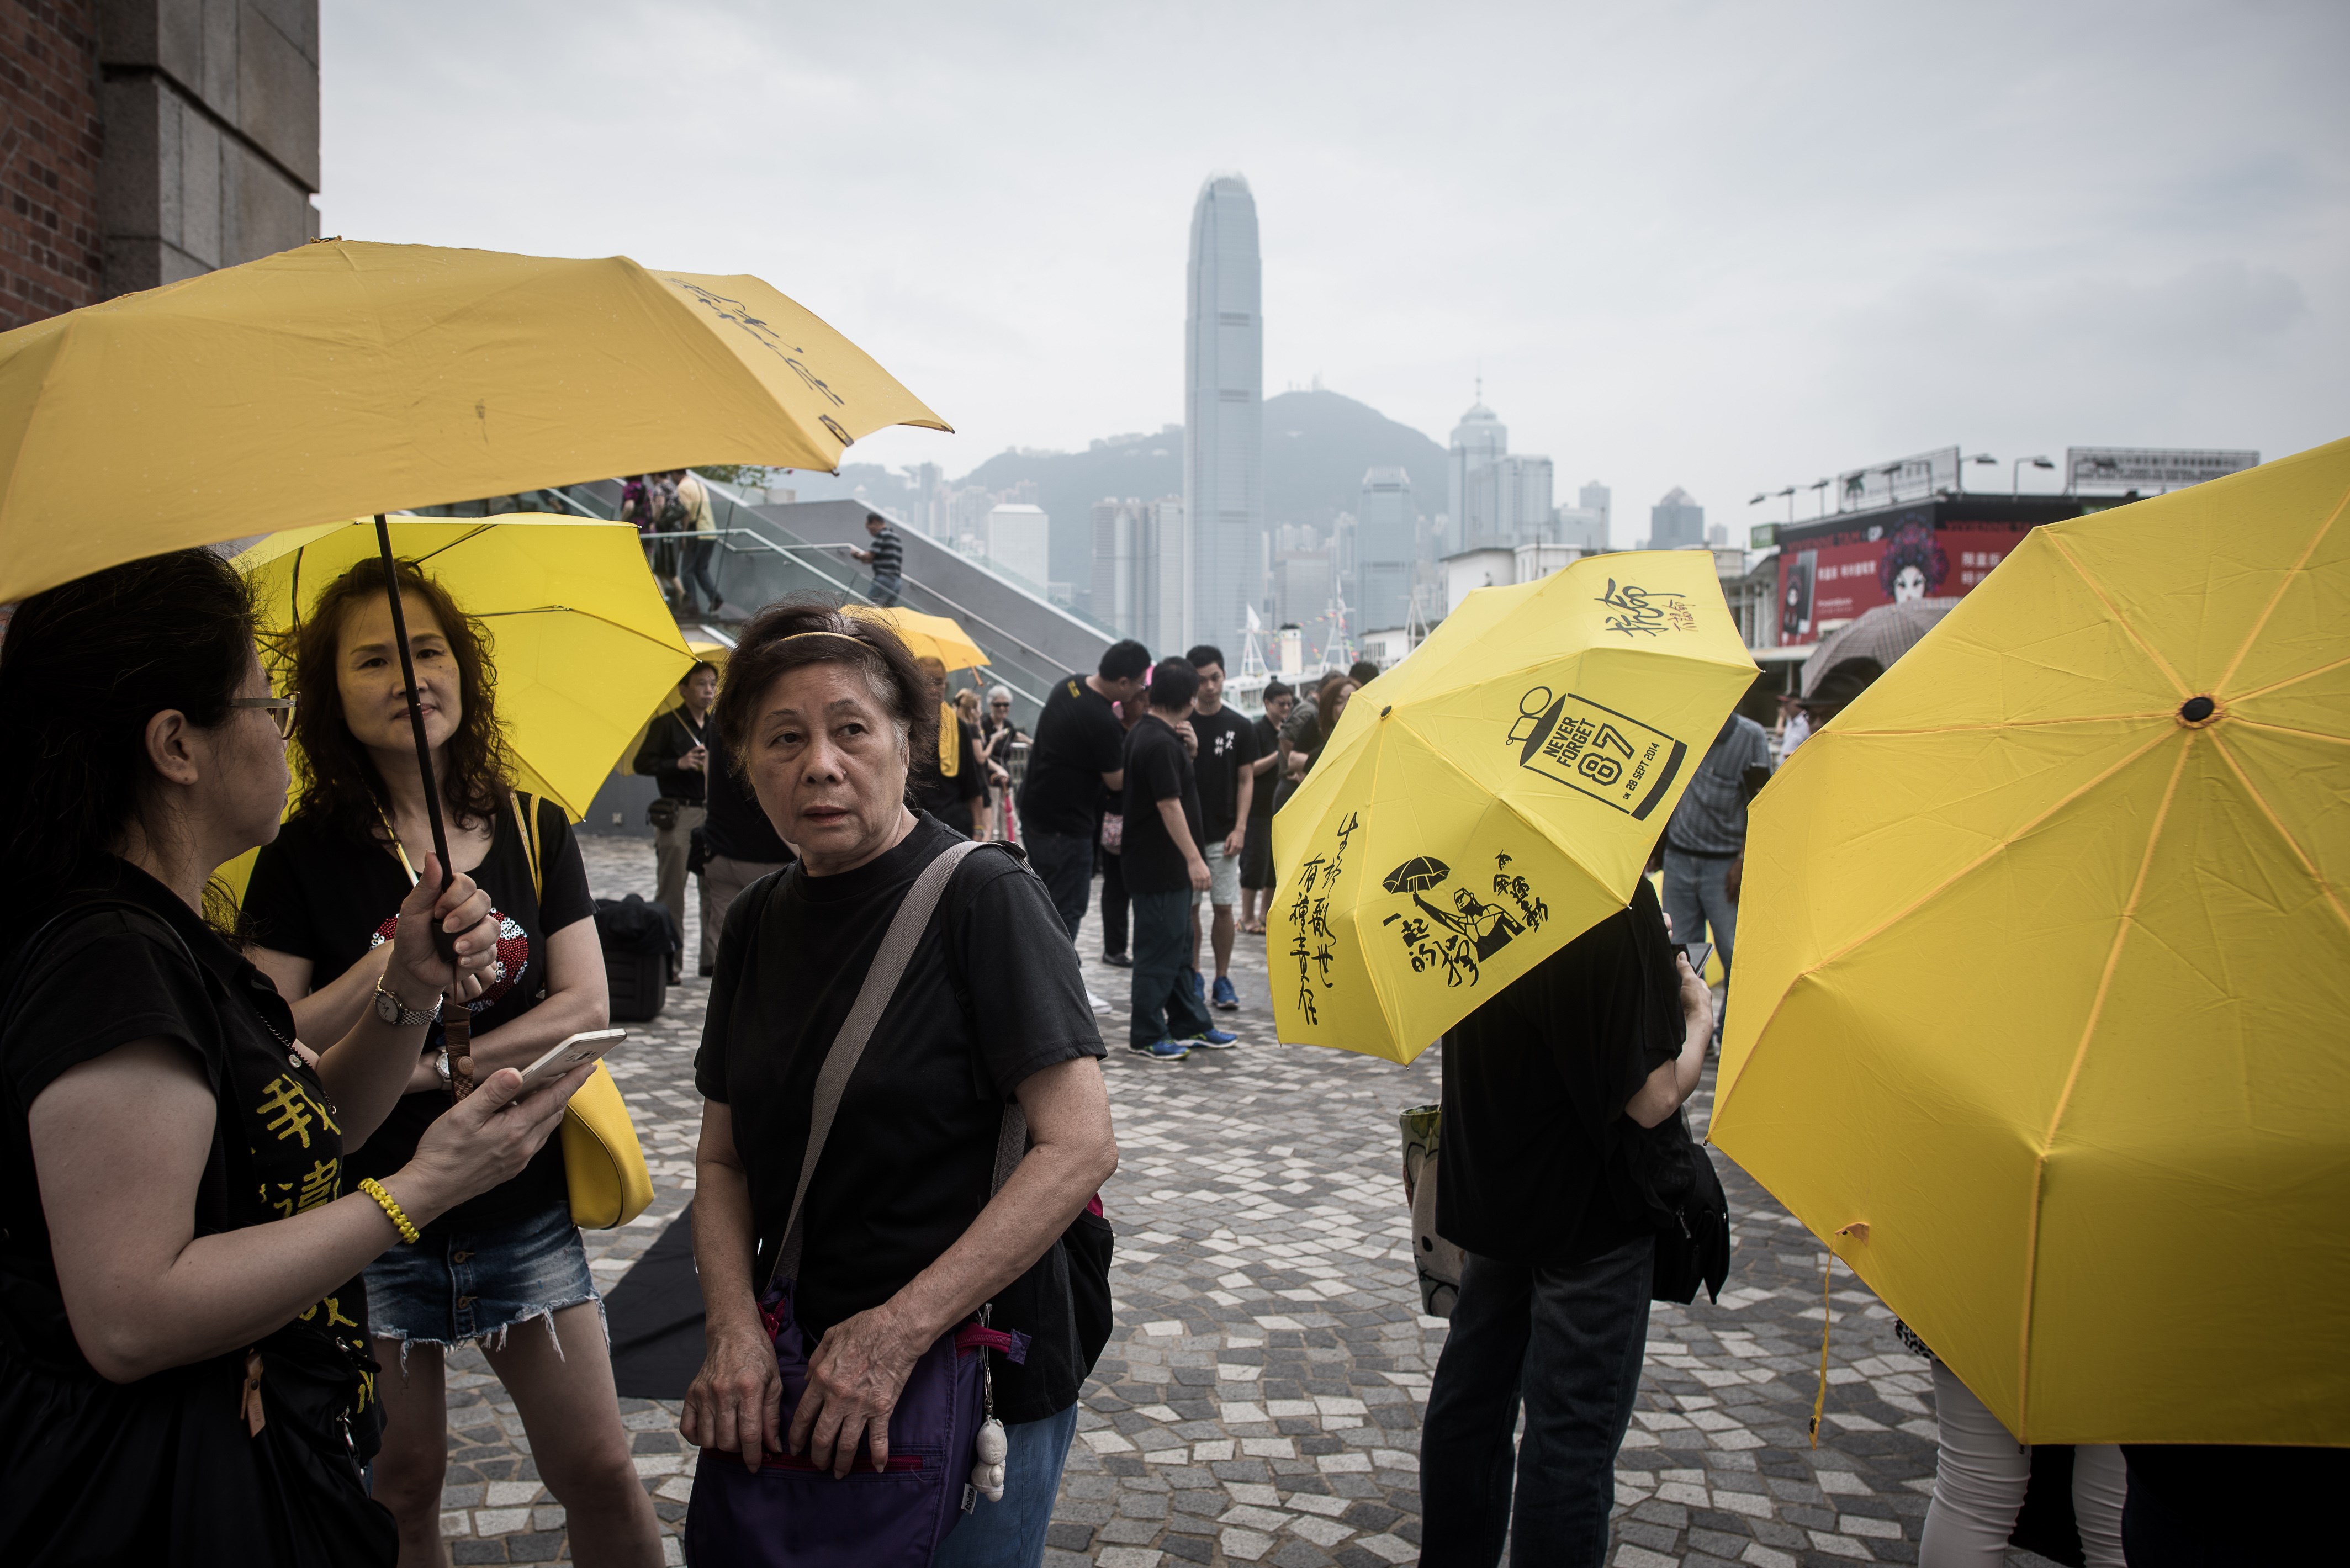 Pro-democracy demonstrators hold yellow umbrellas, a symbol of the pro-democracy movement in Hong Kong on Oct. 1, 2015, as they gather on China's National Day to denounce Beijing's influence over the territory (Philippe Lopez—AFP/Getty Images)